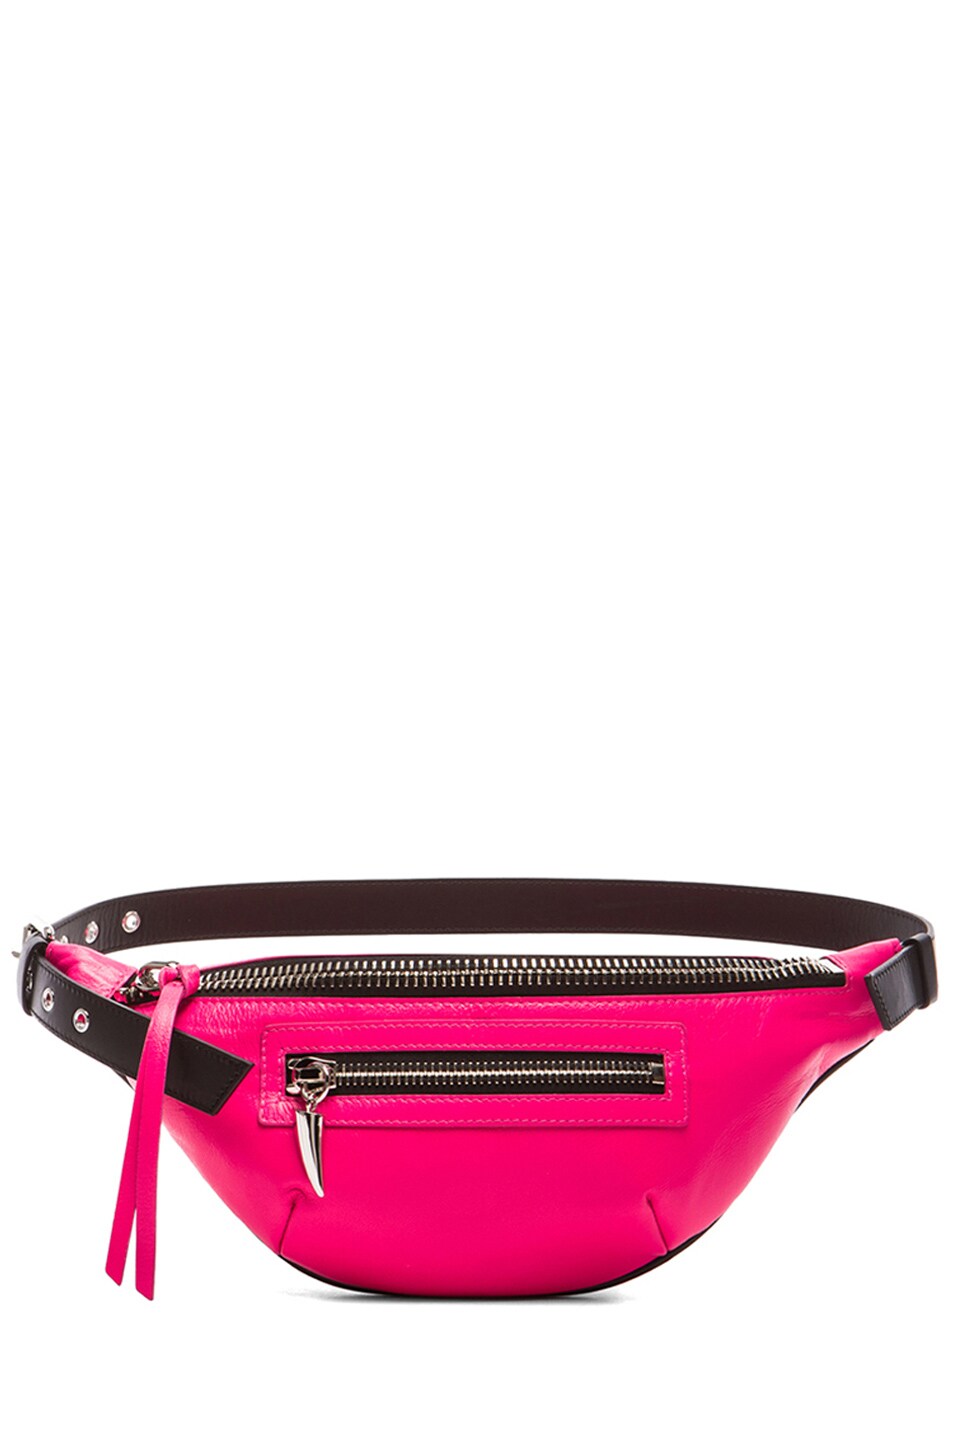 Image 1 of Giuseppe Zanotti Fanny Pack in Neon Pink